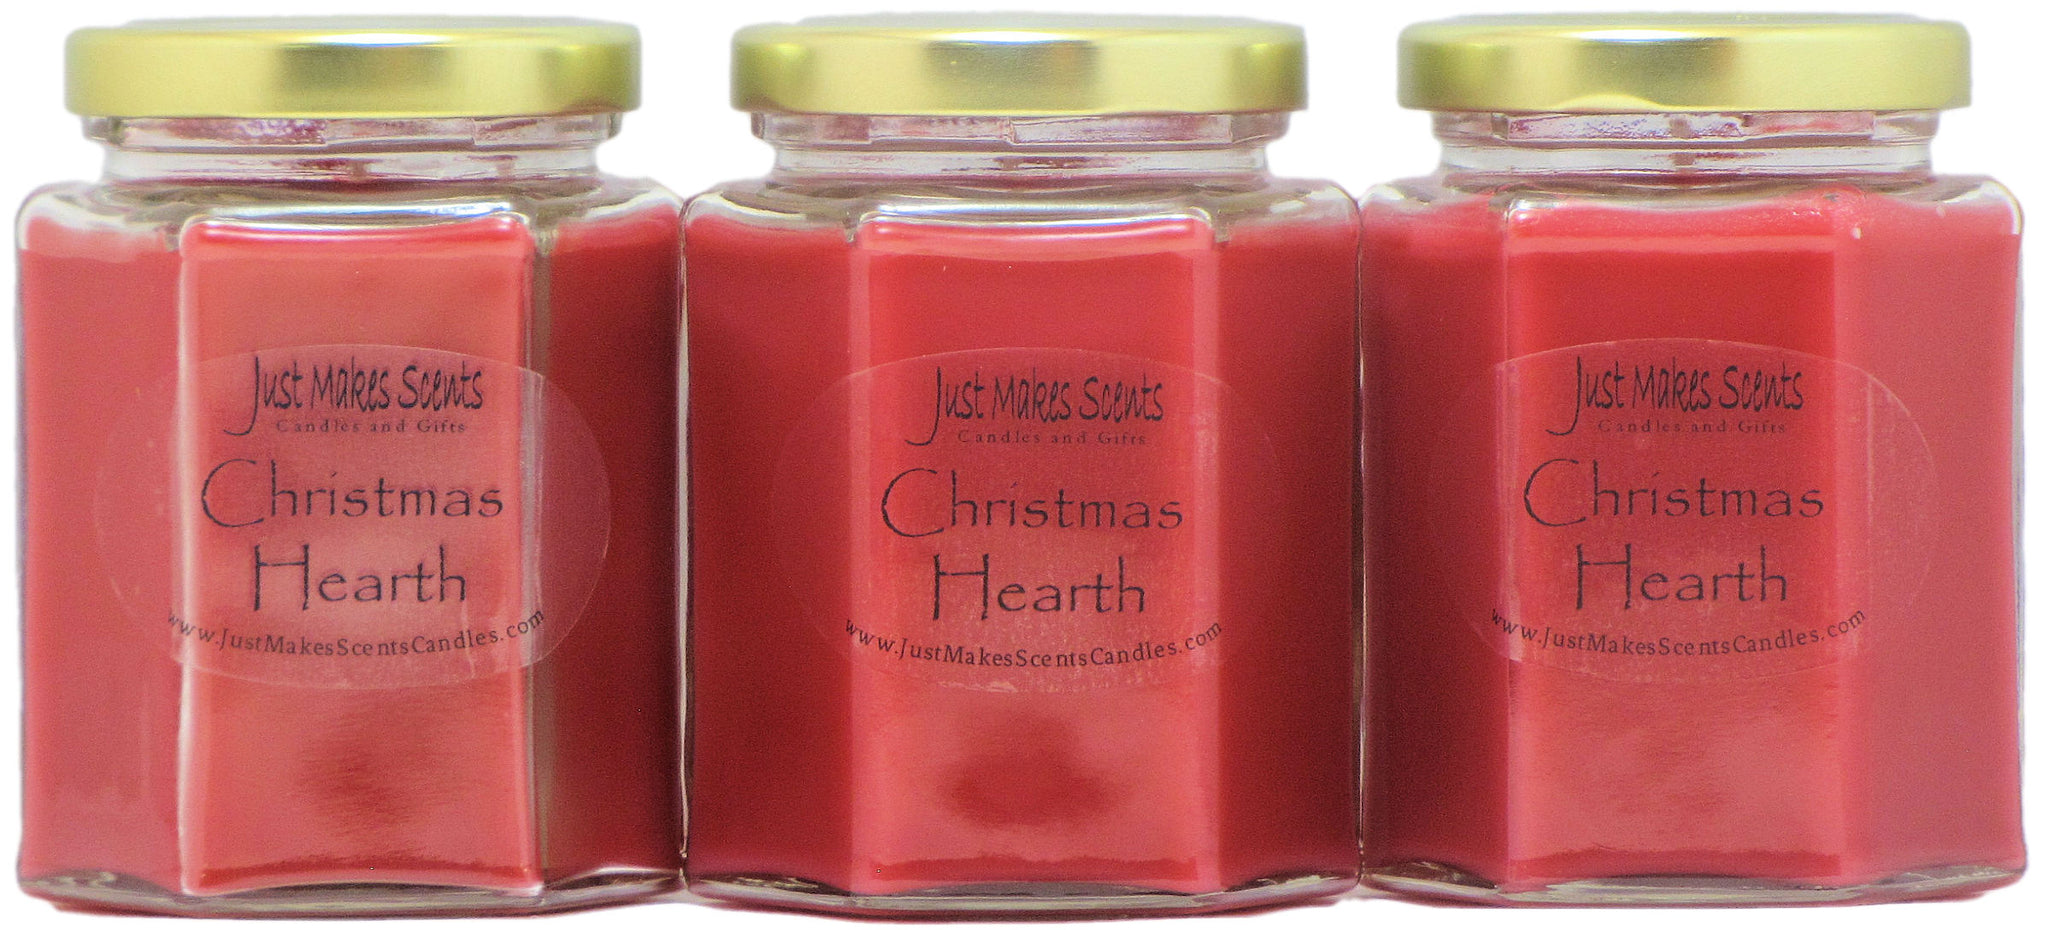 4 Pack - Christmas Tree Scented Wax Melts by Just Makes Scents